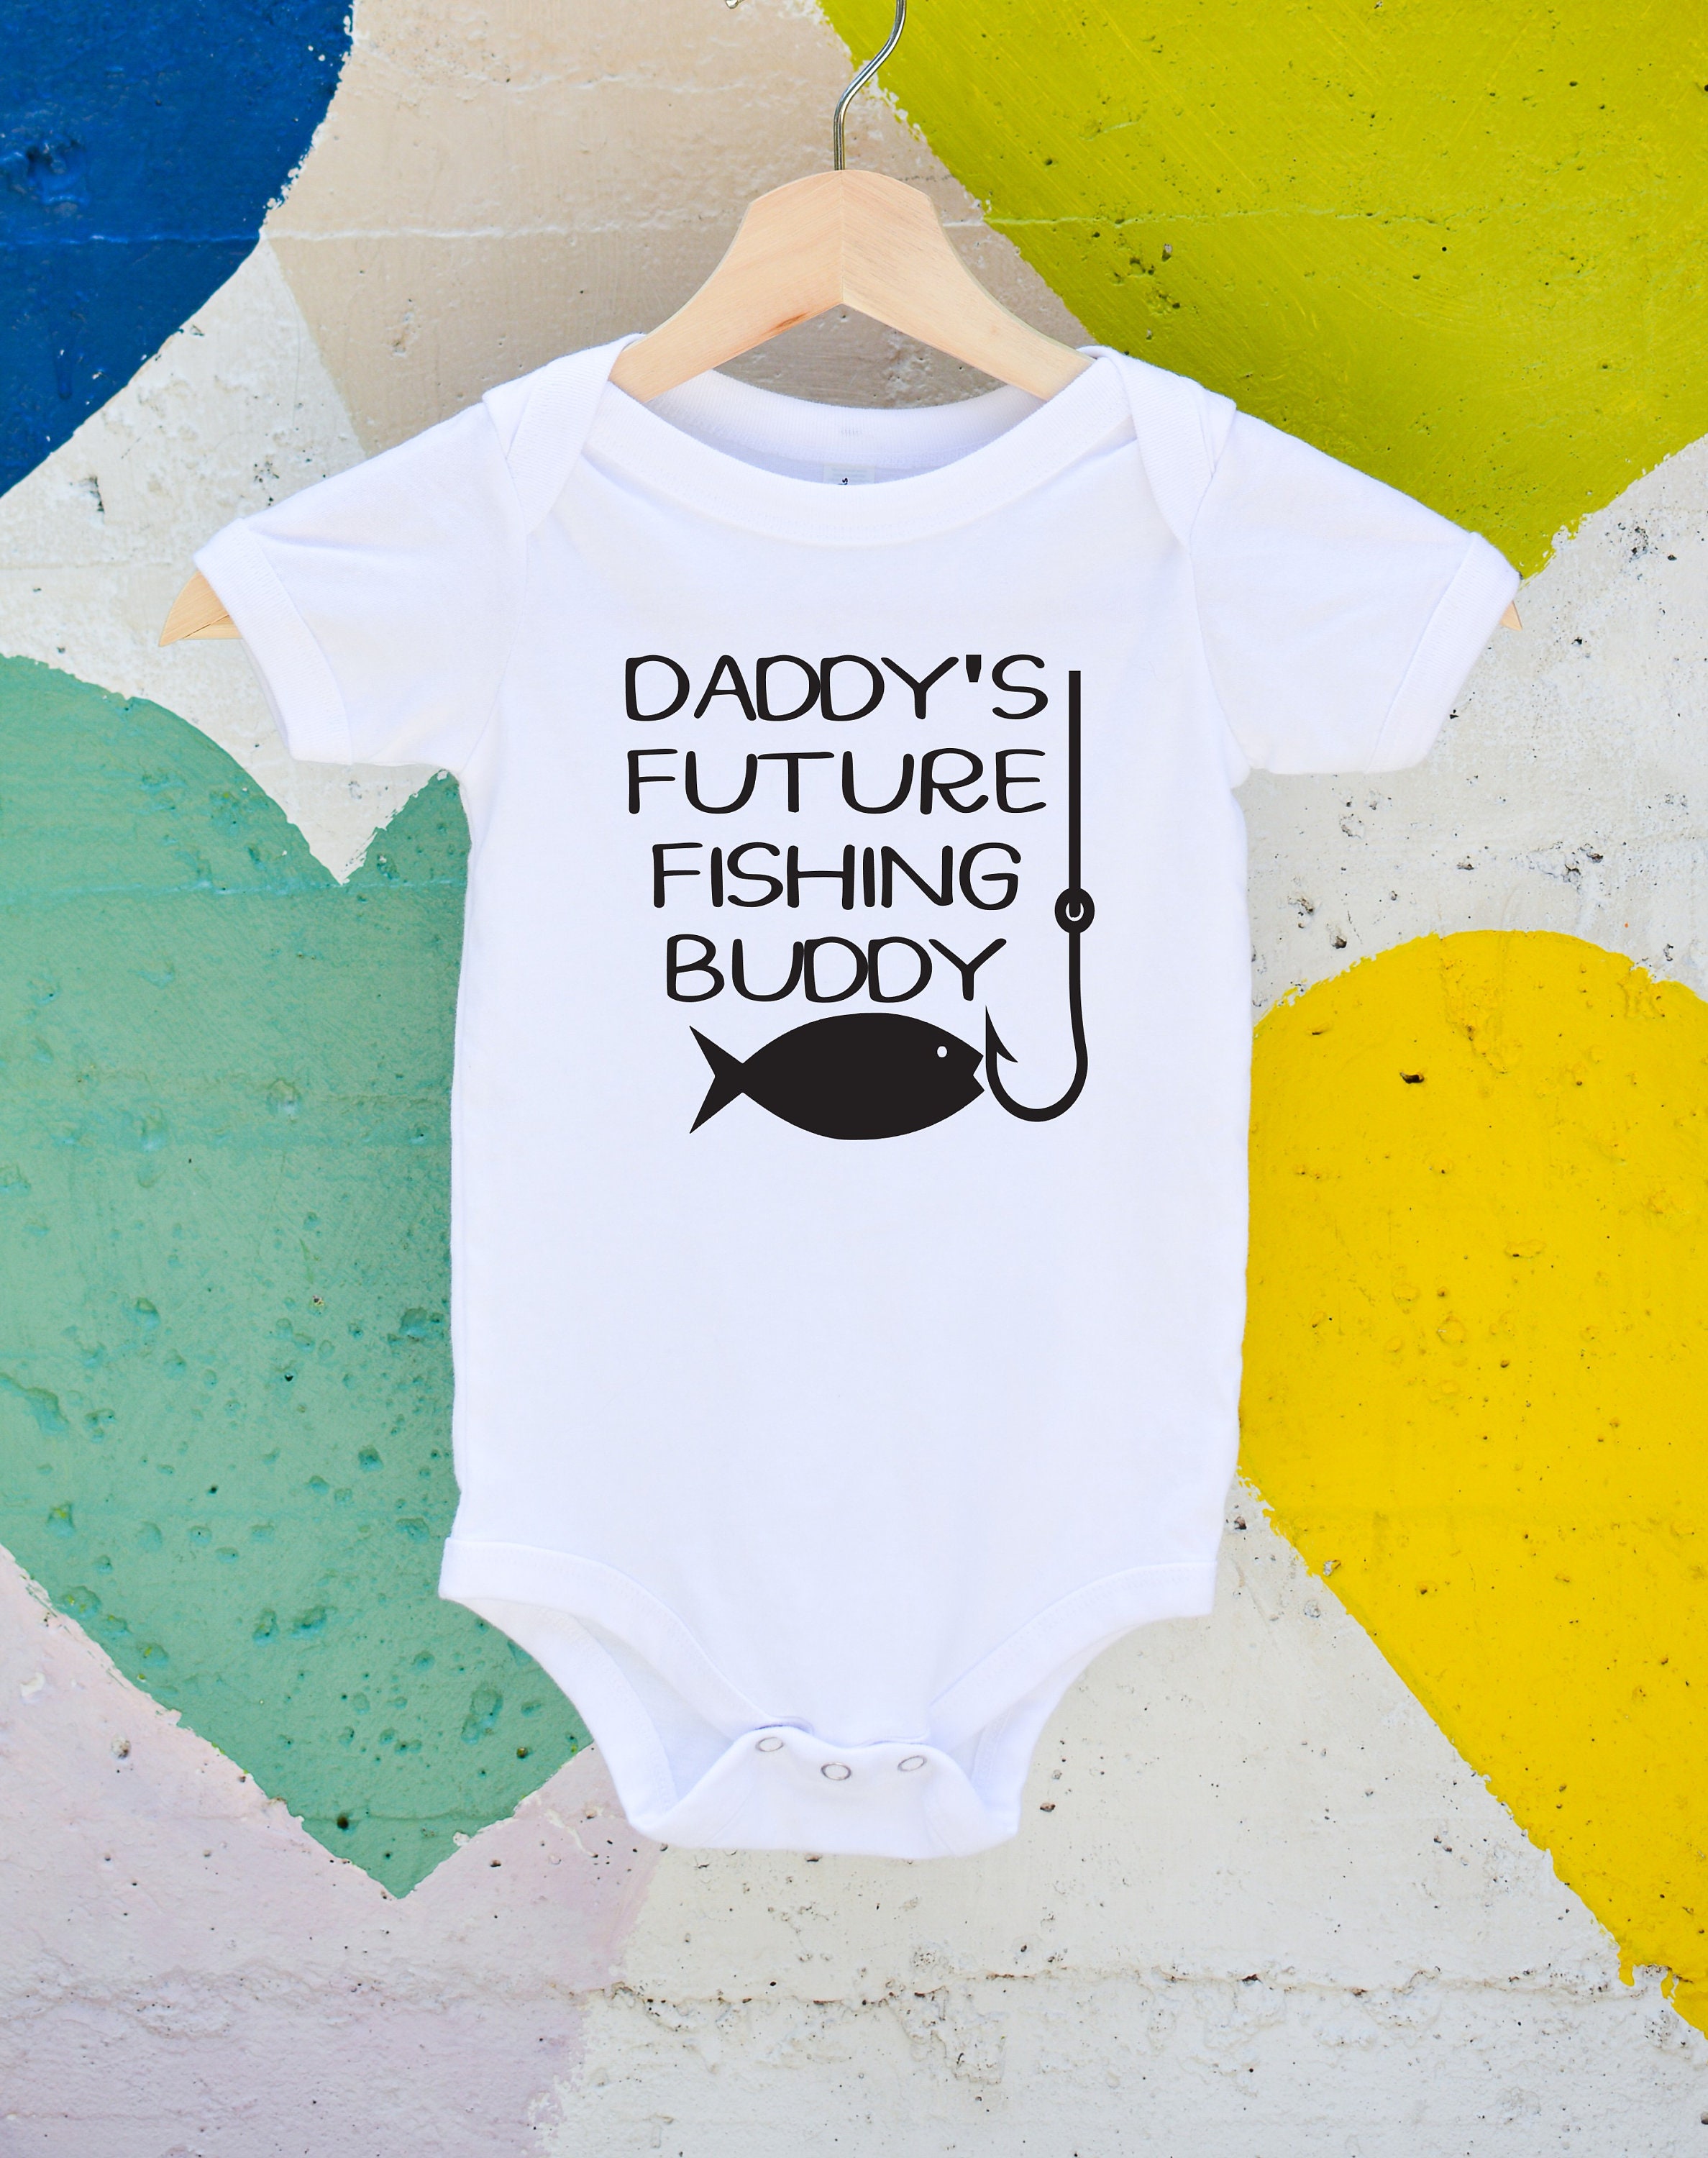 Daddy's Future Fishing Buddy, Baby, Baby Shower Gift, IVF Baby, Baby  Announcement, Baby Bodysuit, Fun Toddler Tee, Funny Baby Bodysuit 